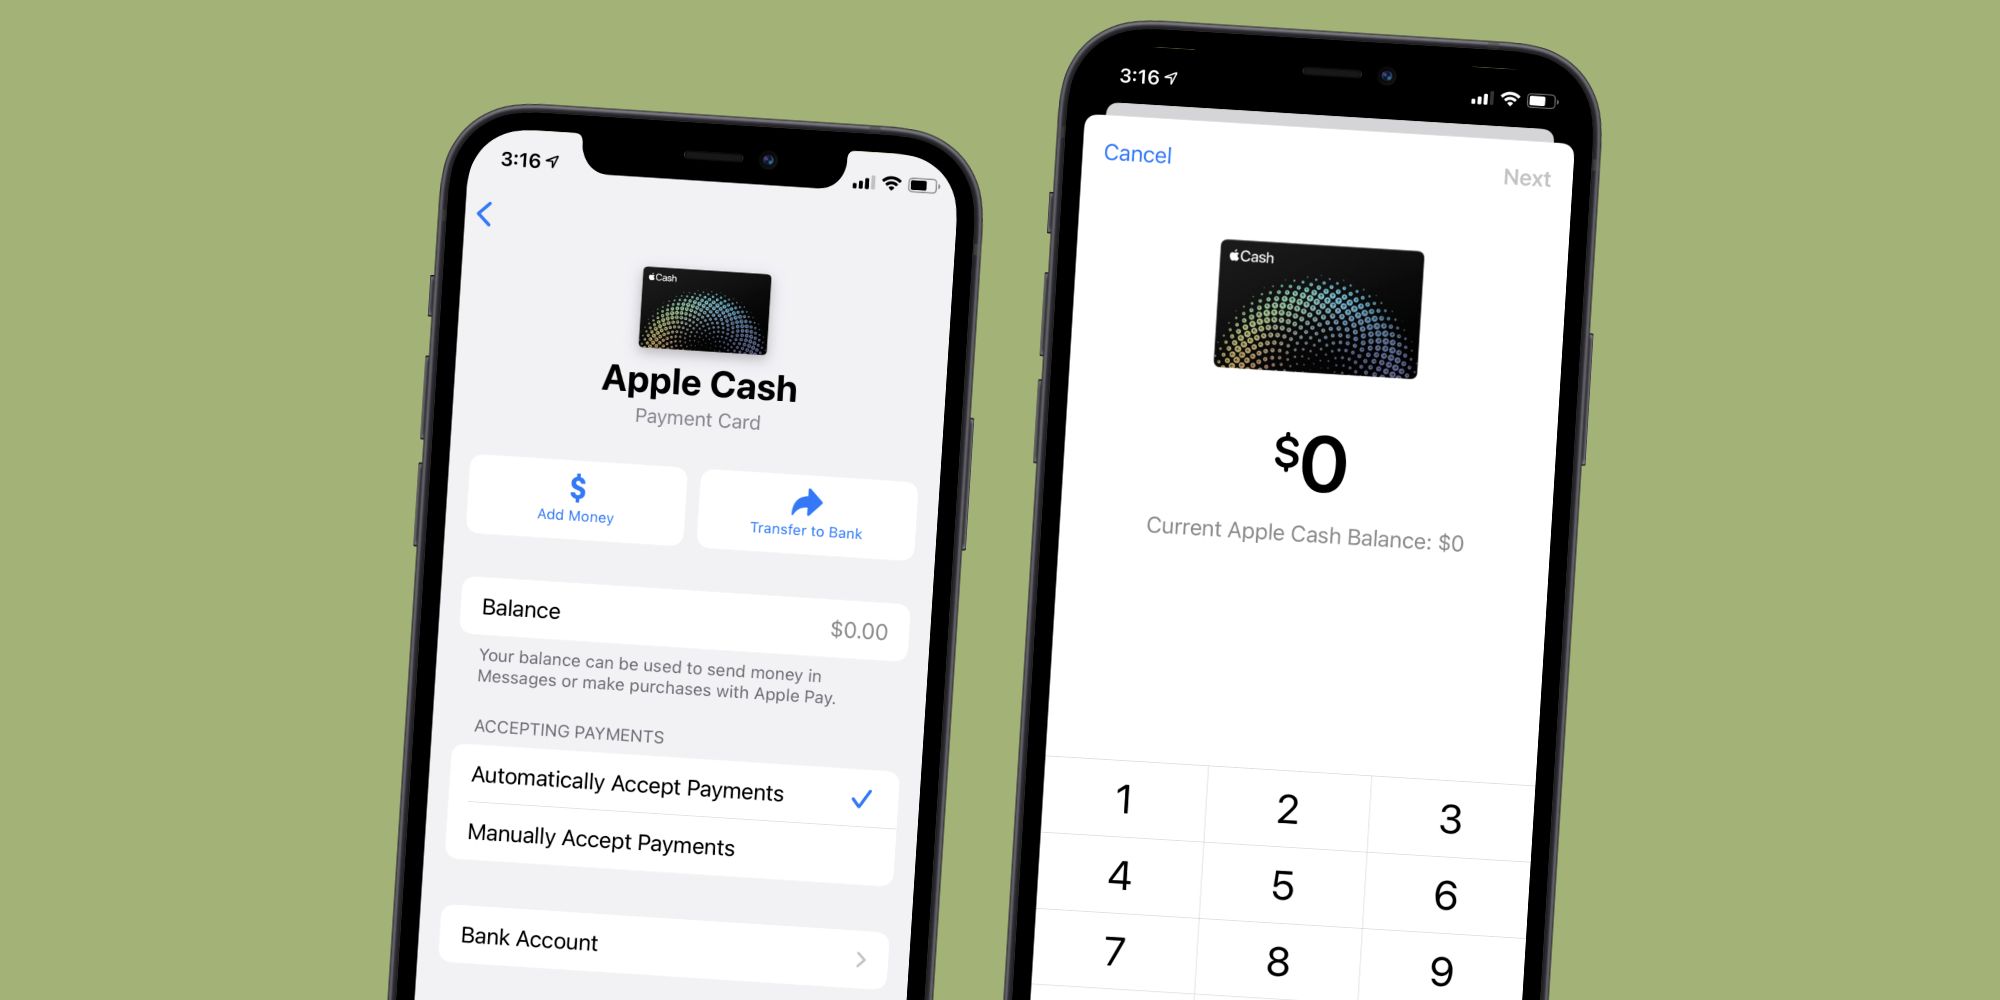 How To Transfer Apple Cash To Your Bank